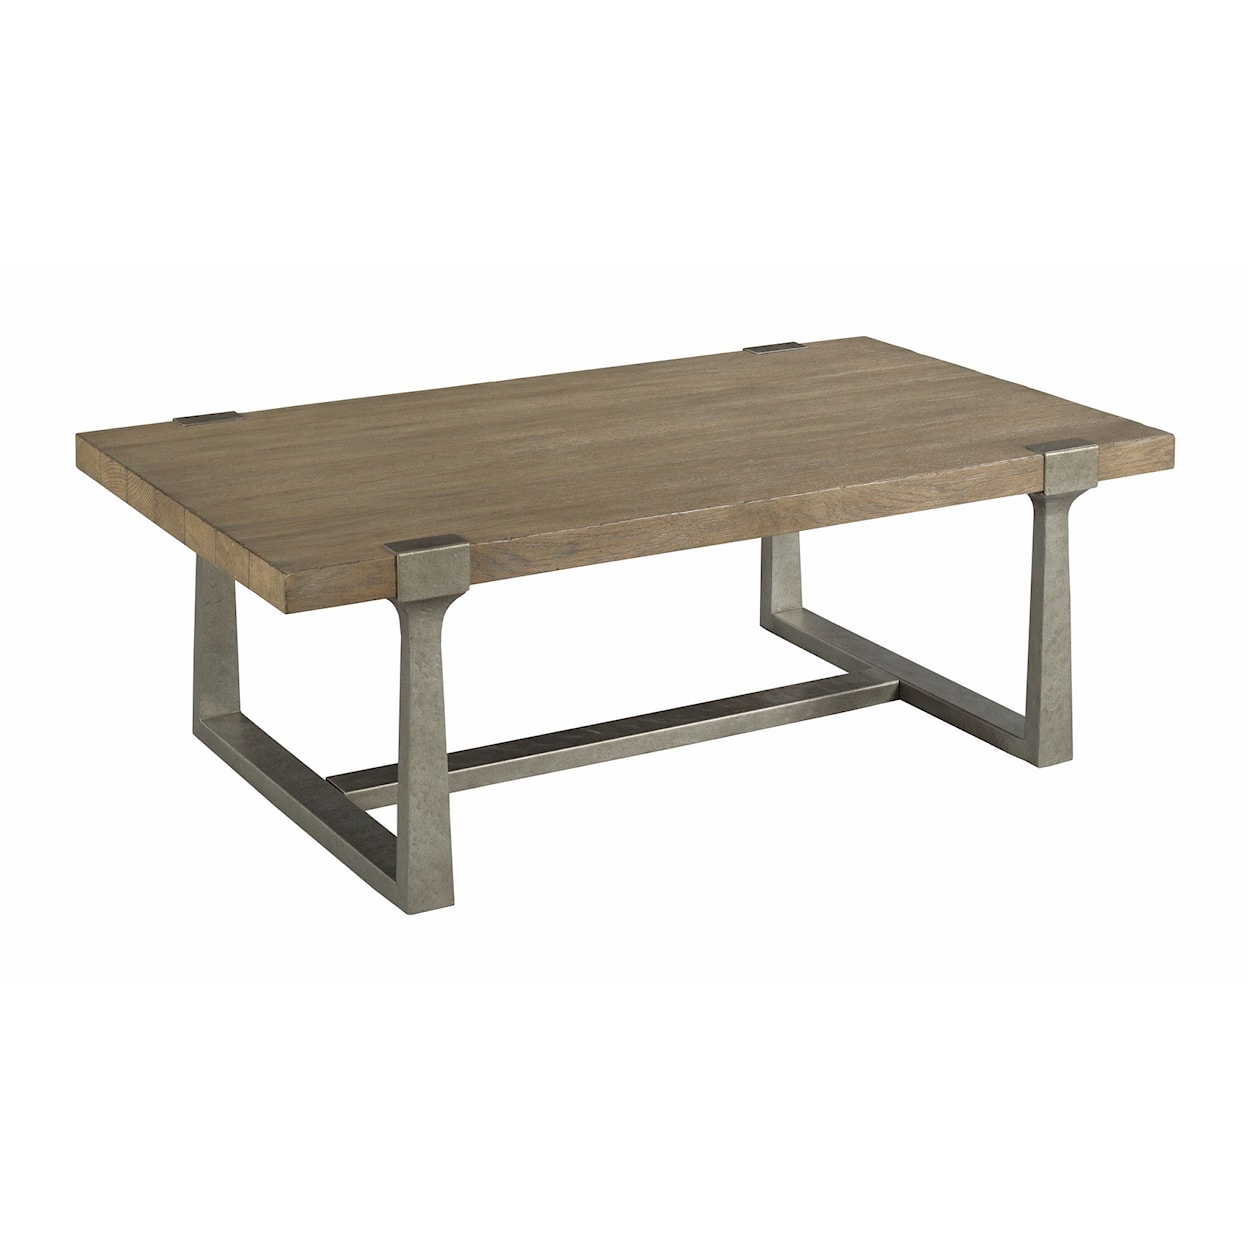 Hammary Timber Forge Rectangular Coffee Table